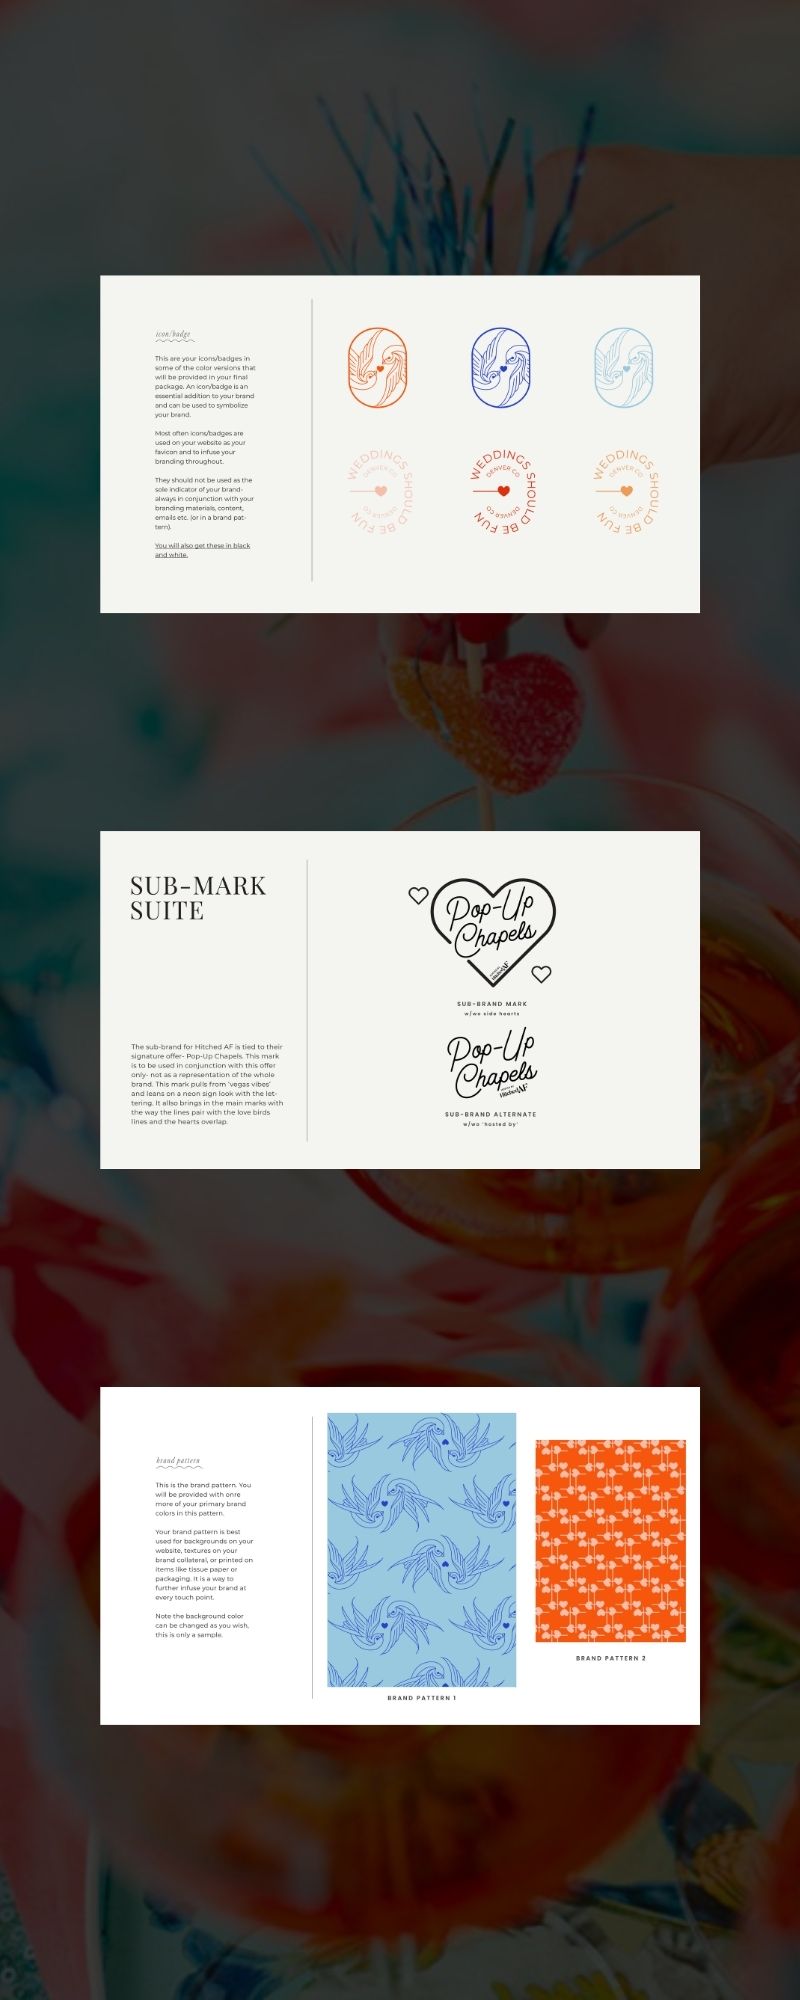 Three internal brand guide pages showing the inner details of the strategy behind a wedding planner logo.